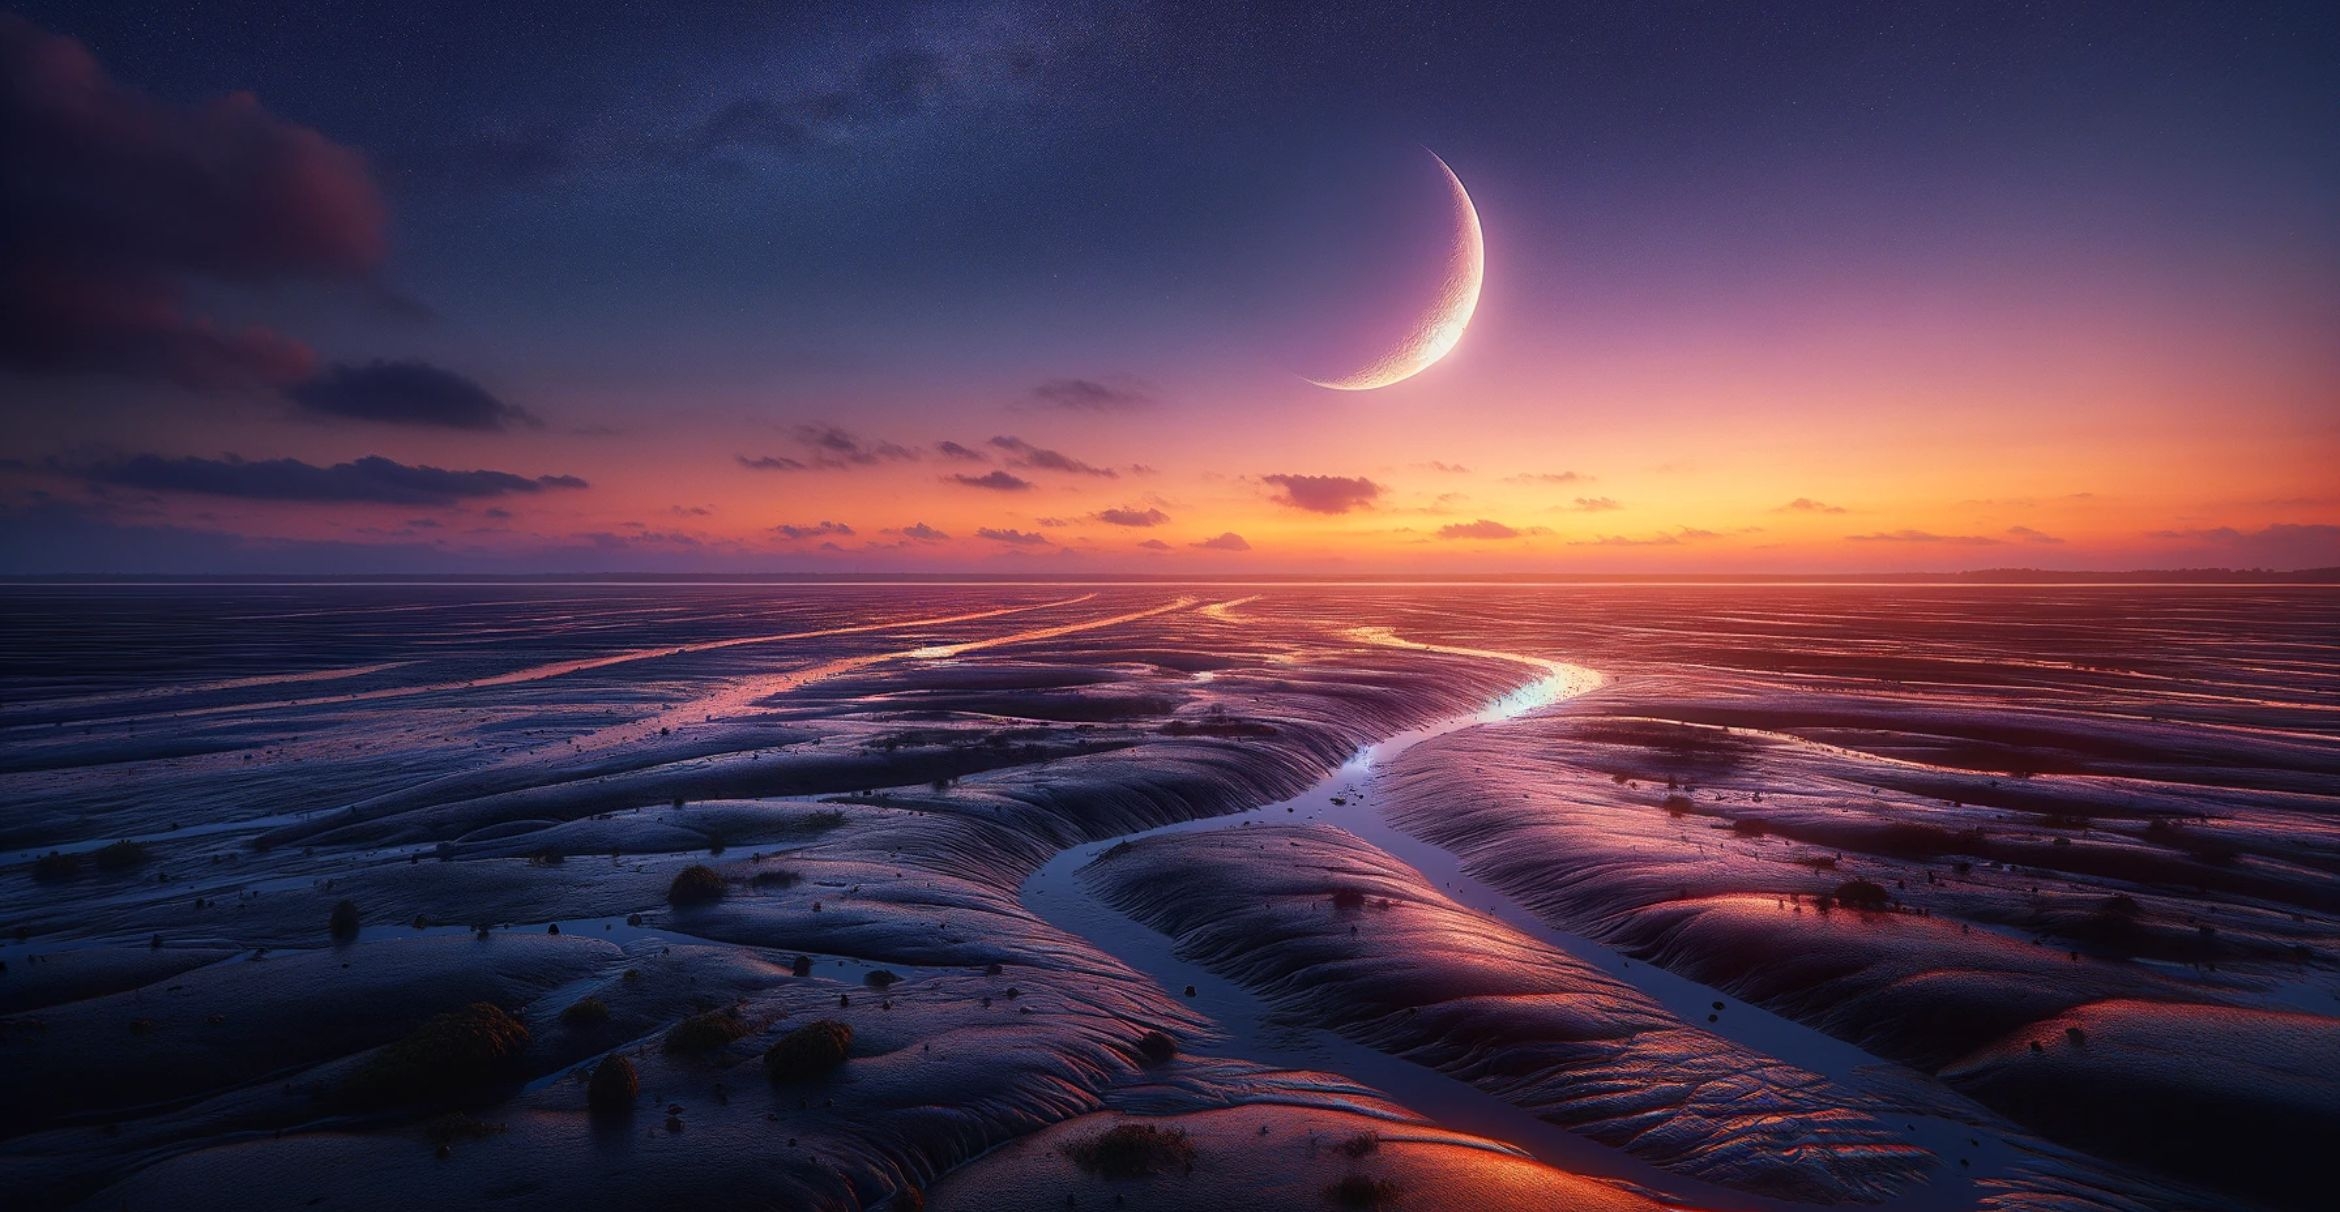 A large crescent moon shines in the early twilight over tidal mudflats.